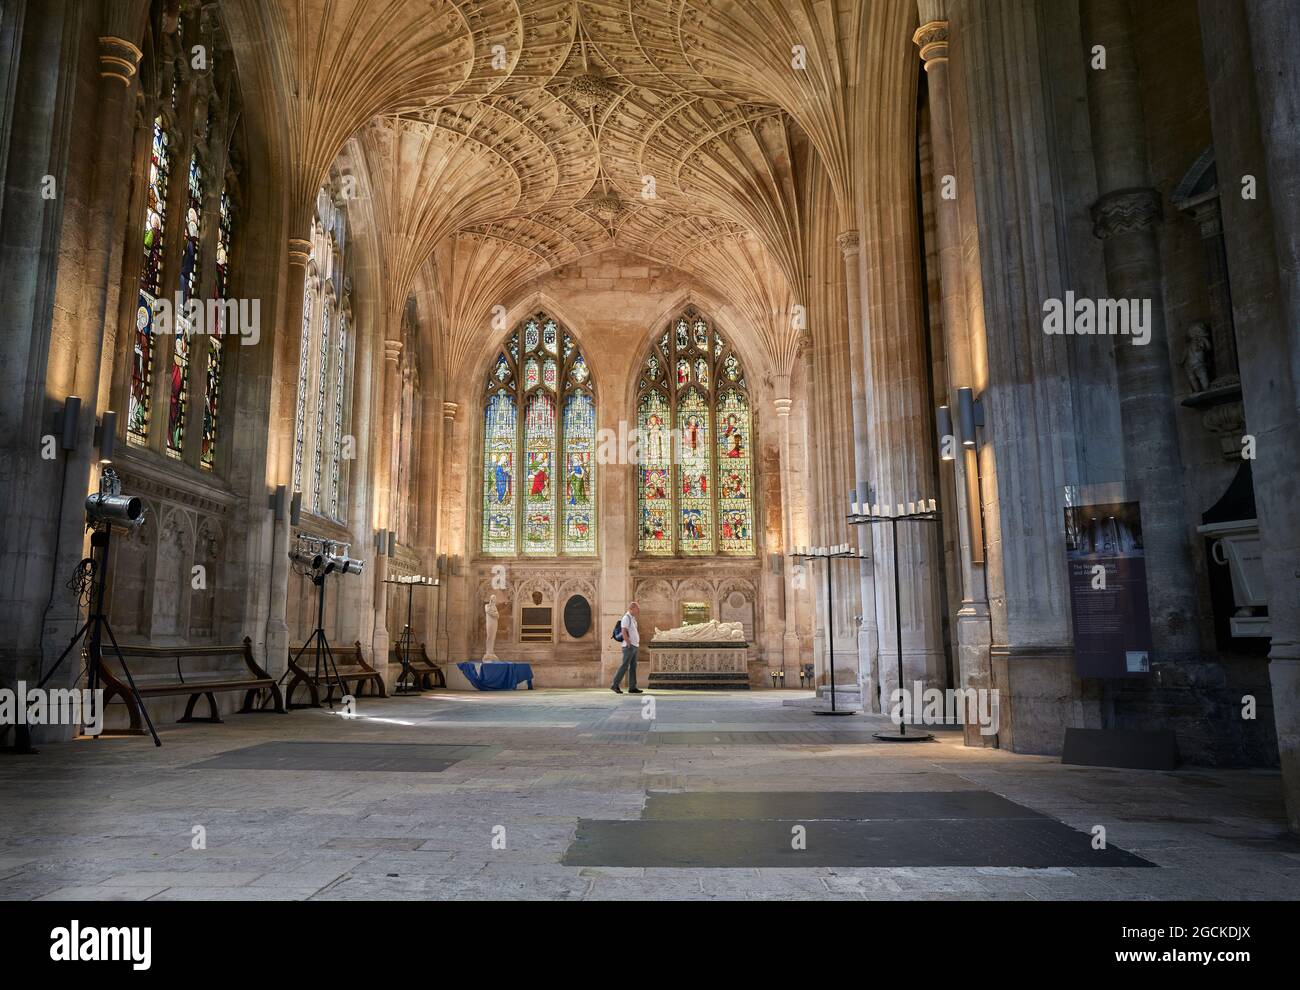 The east end with its stone fan vaulting at the medieval christian cathedral in Peterborough, England. Stock Photo